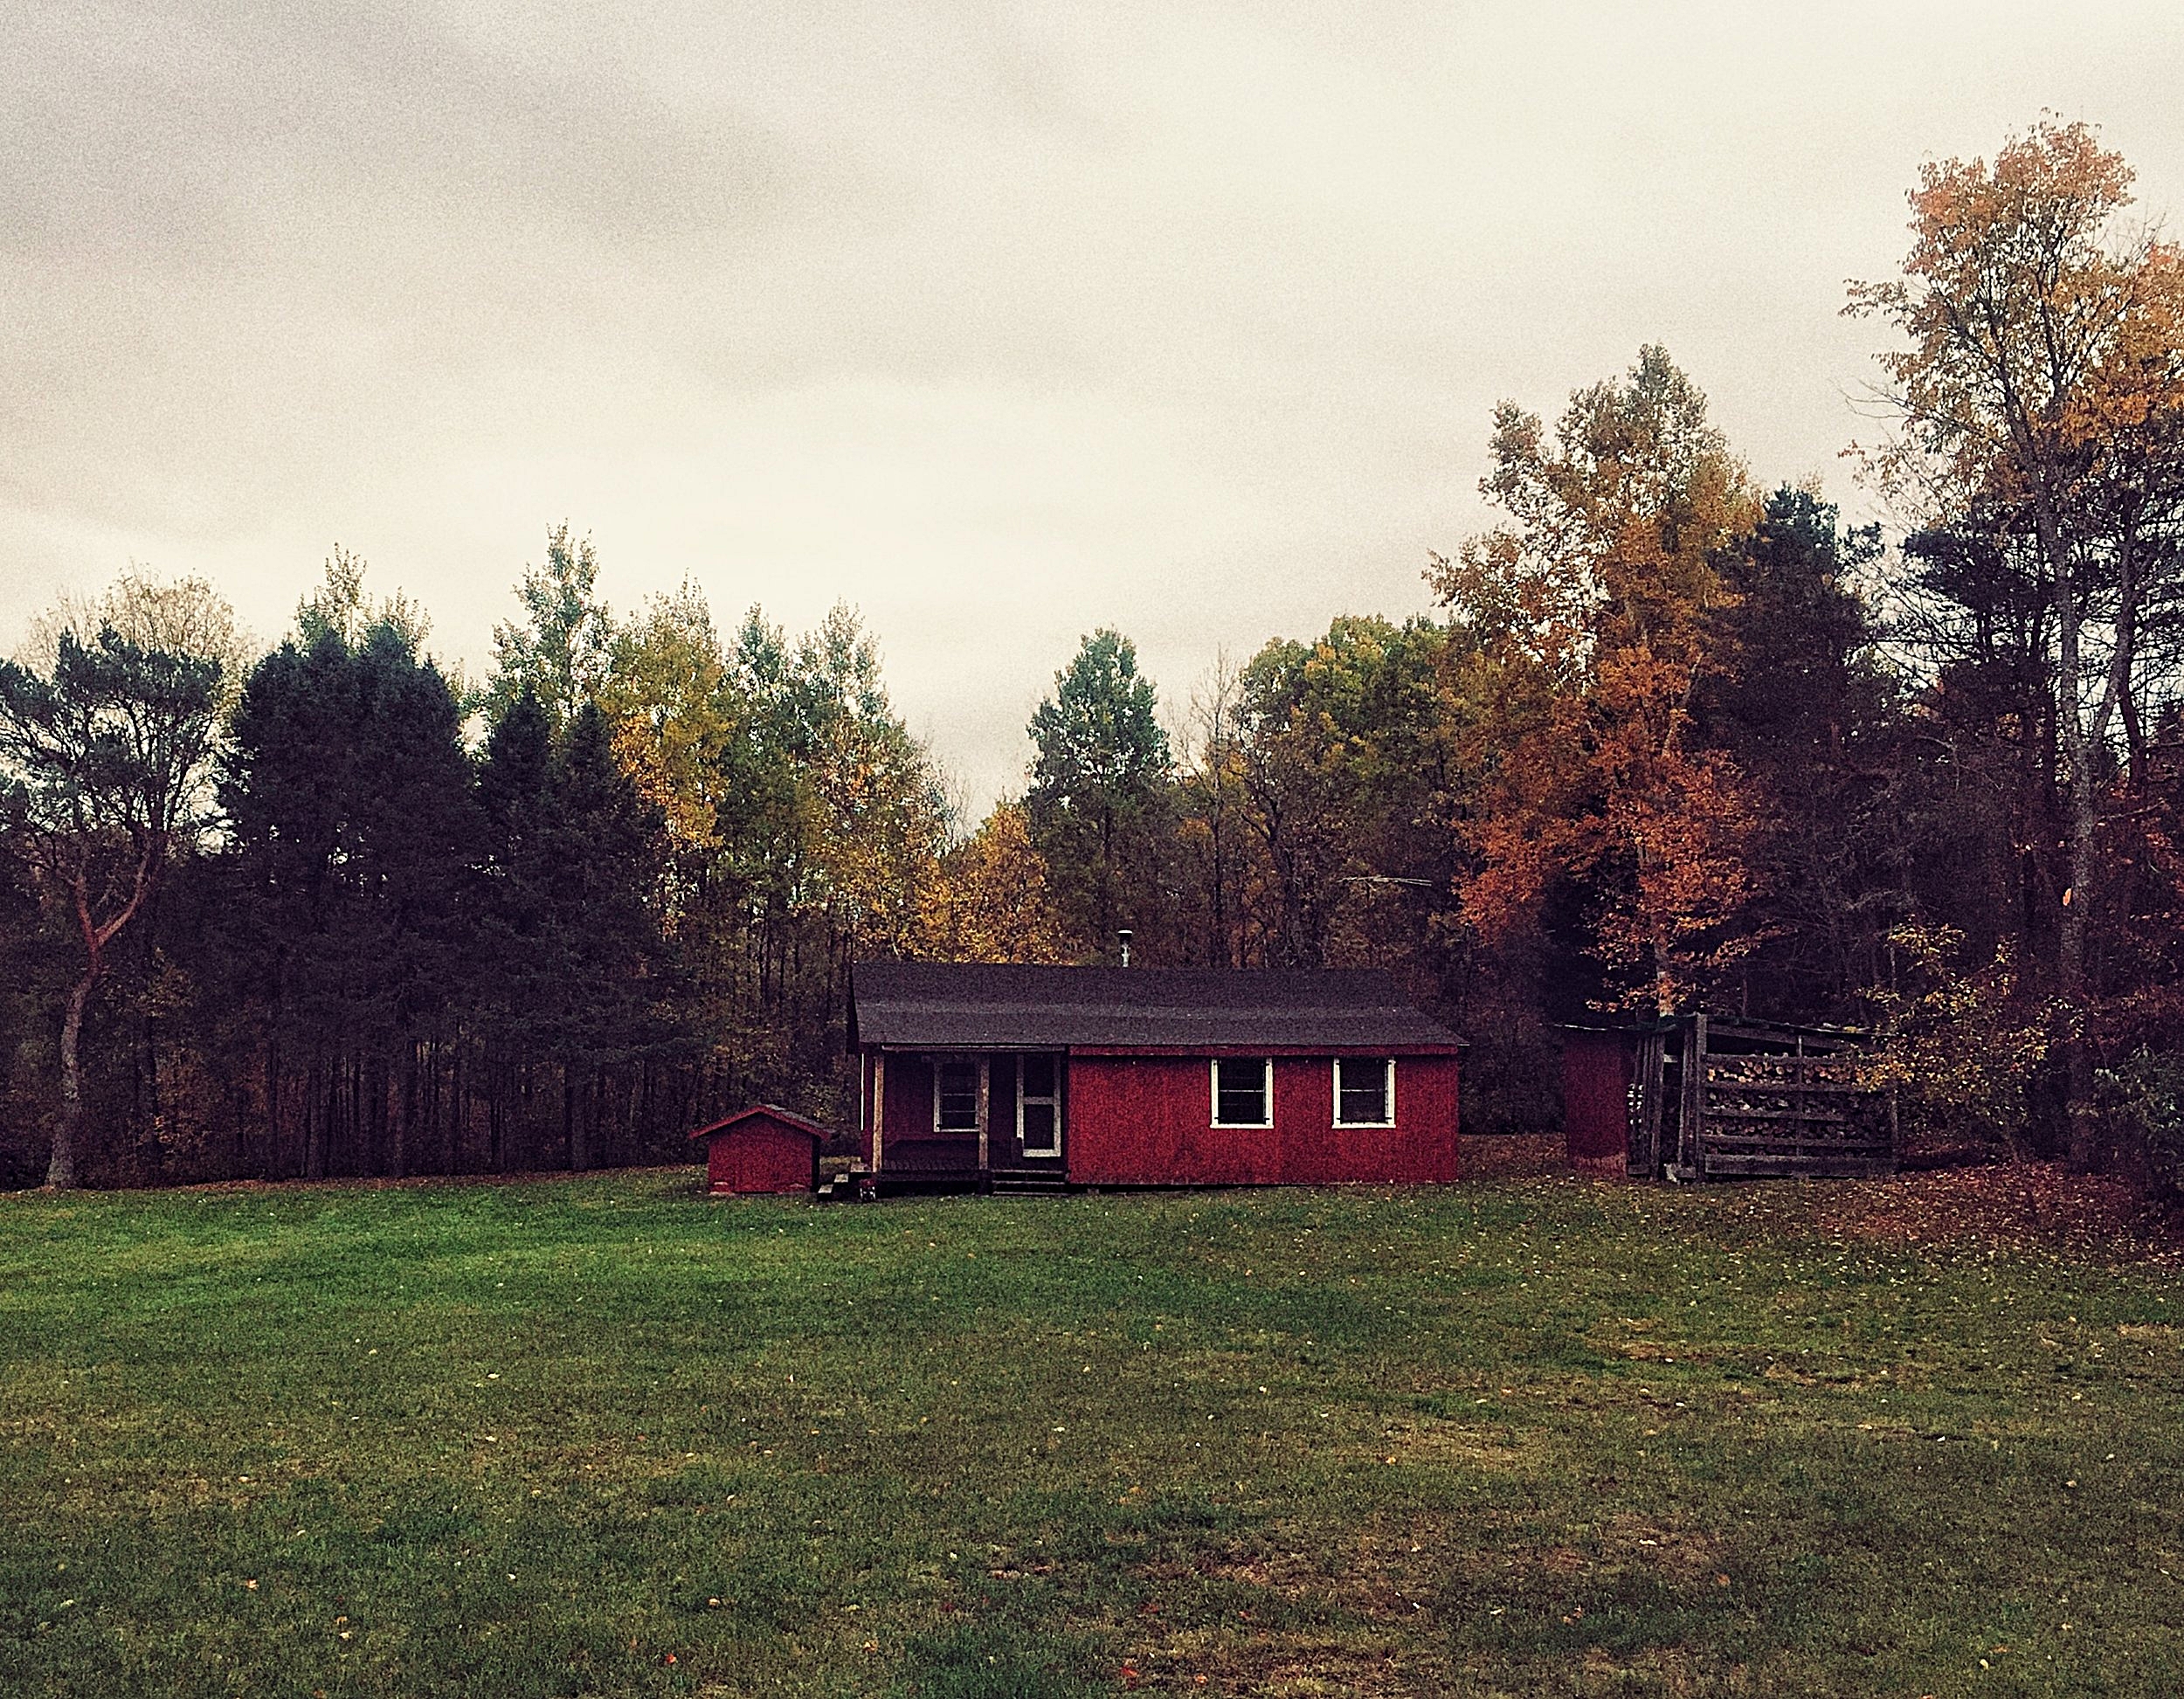  The Doll House in Owls Head, N.Y.,&nbsp;one of the many cabins where Richard Matt and David Sweat stayed during their time on the run.&nbsp; (Chelsia Rose Marcius/October 16, 2016)&nbsp;  